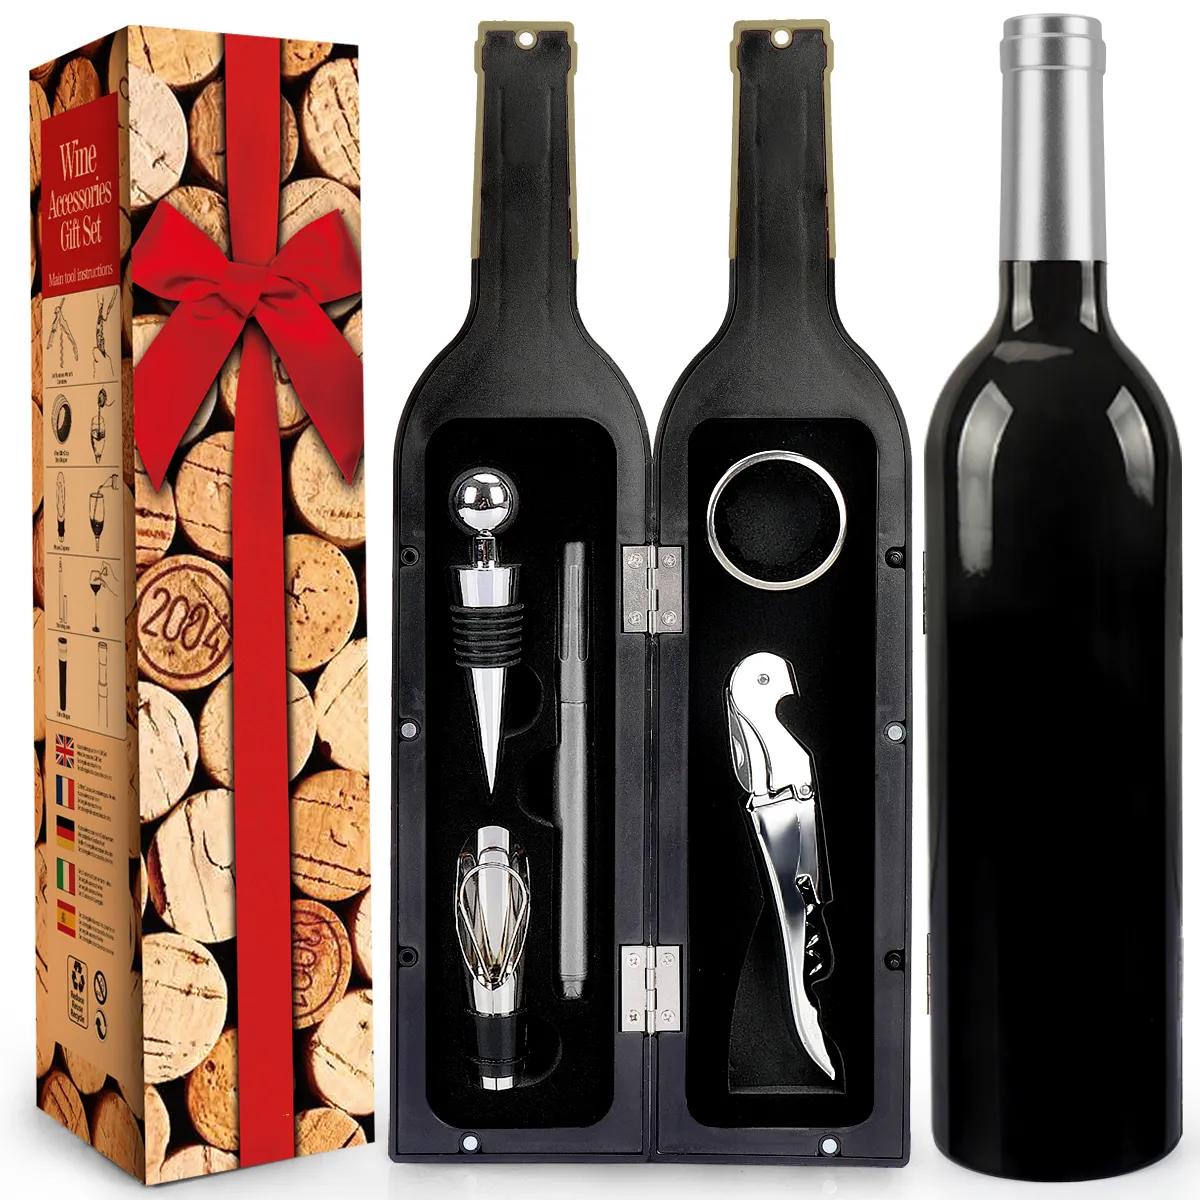 Amazon seller Creative bottle shaped 5 pieces wine accessories gift set wine opener gift set Innovative wine set for xmas gifts